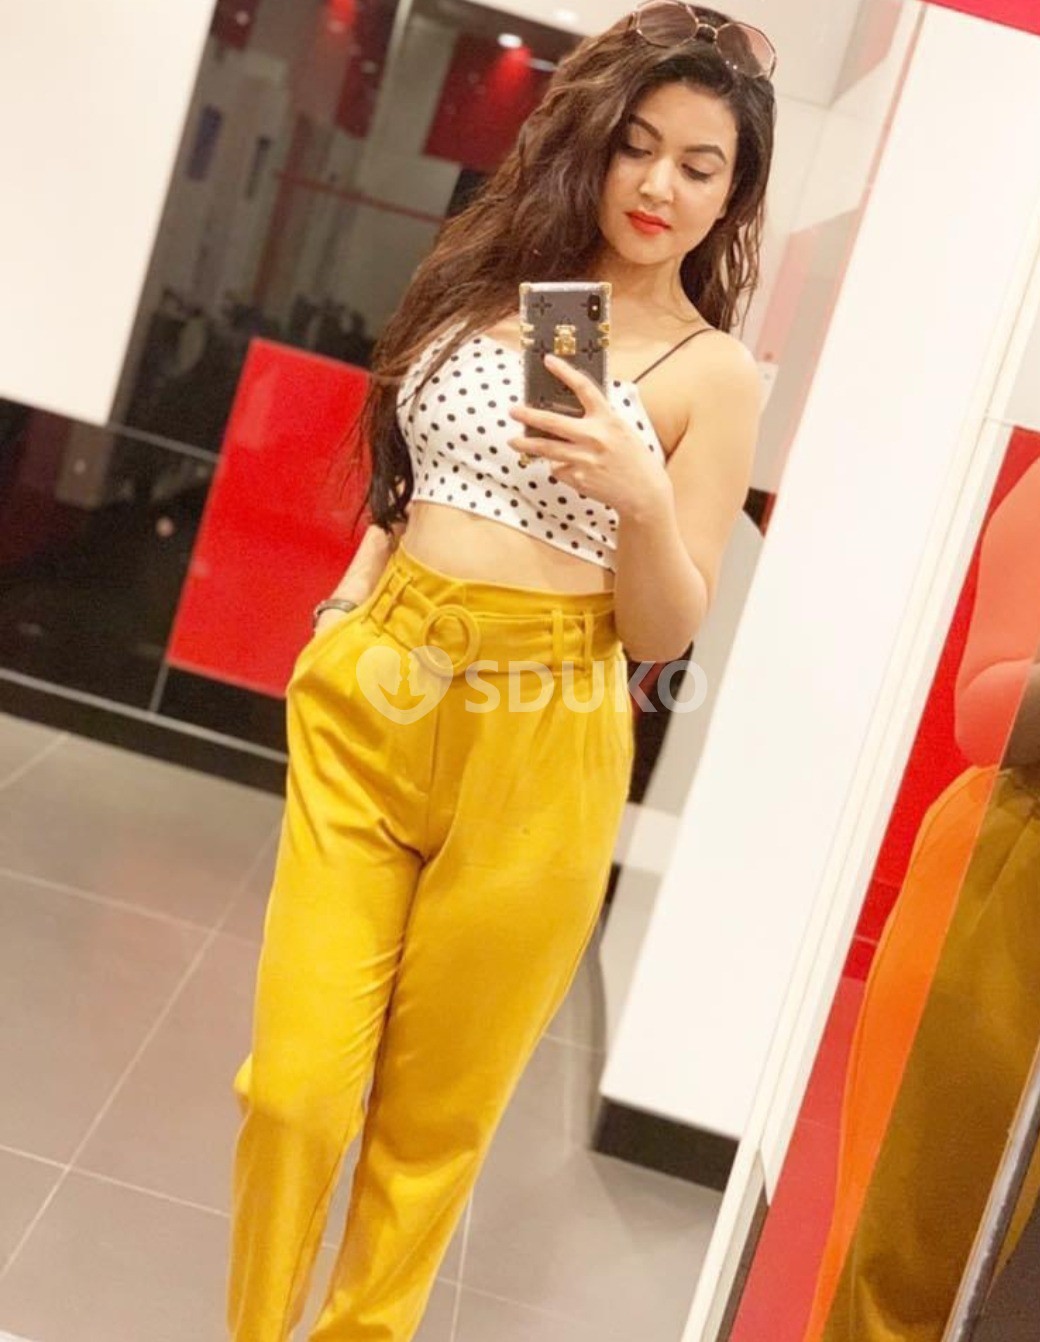 PITAMPURA HOT HIFH PROFILE TRUSTED GIRL AVAILABLE